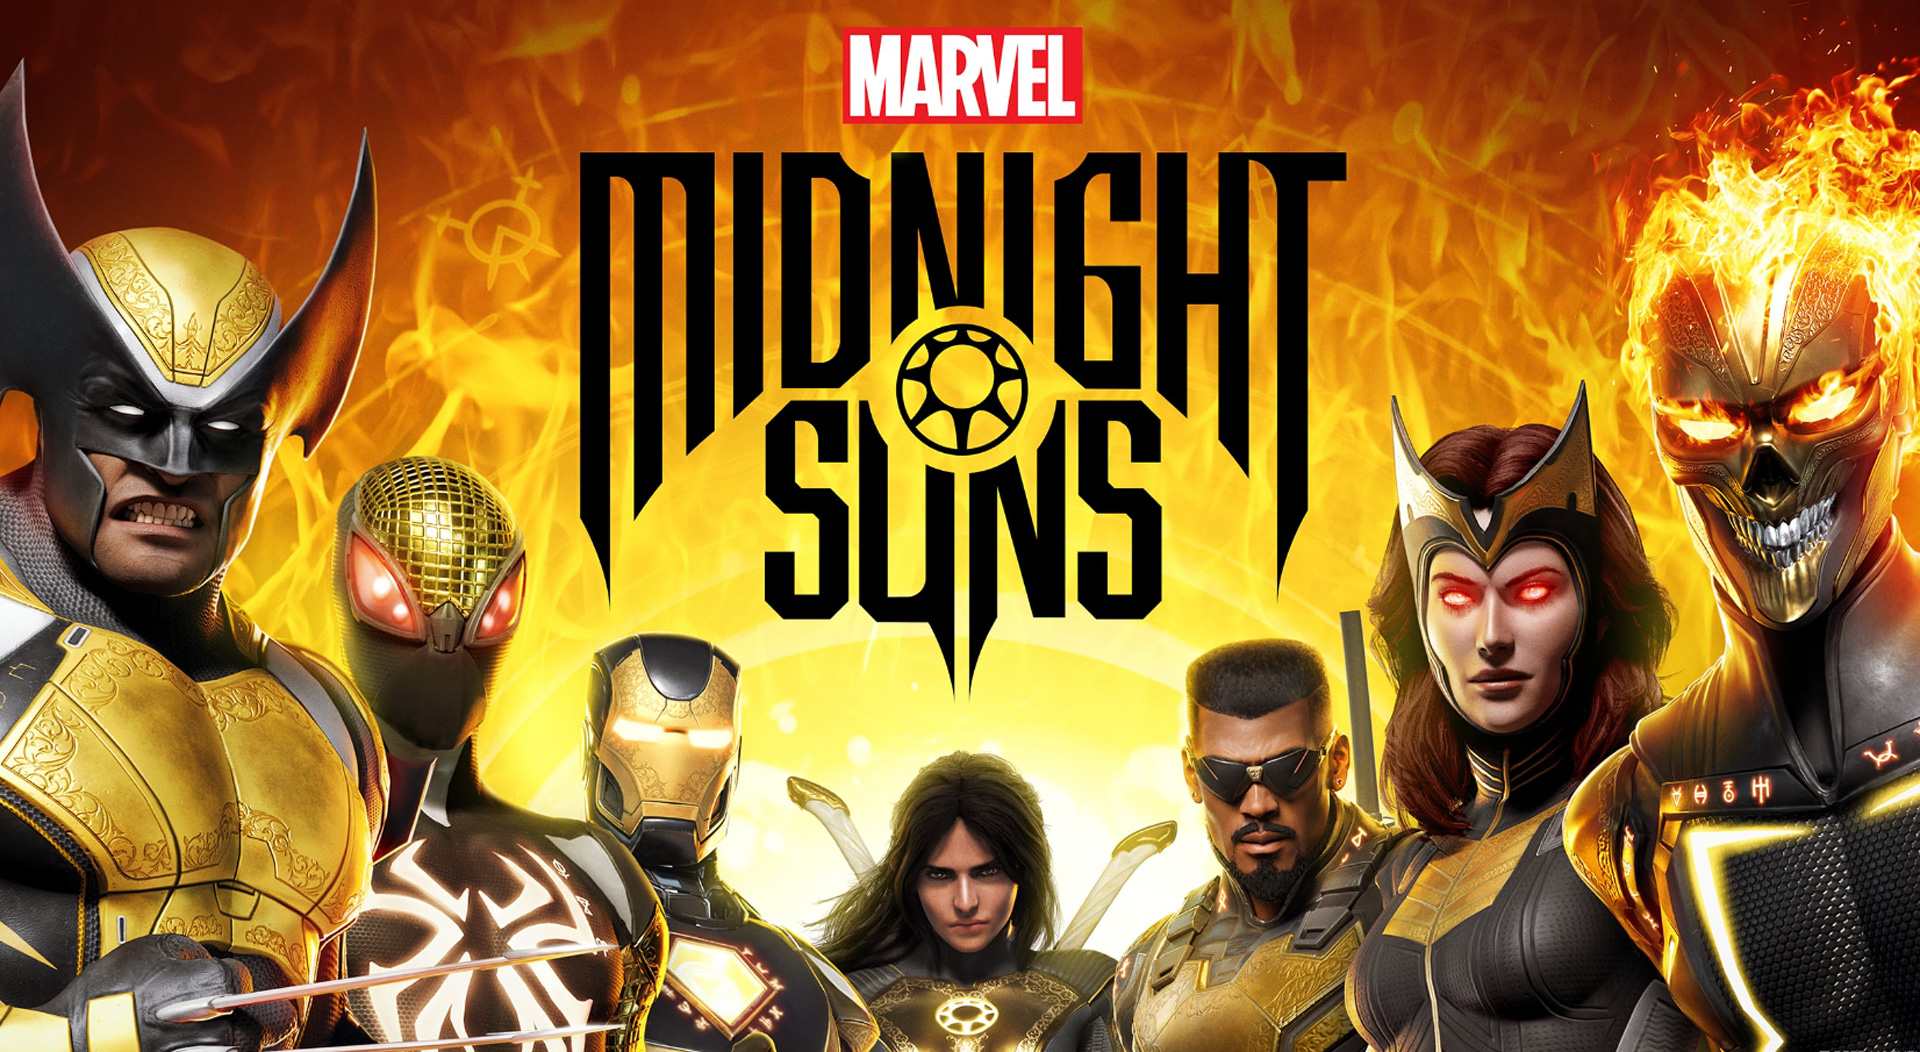 There has been an important development about Marvel's Midnight Suns release date, and in this article, we are going to be updating you on everything.